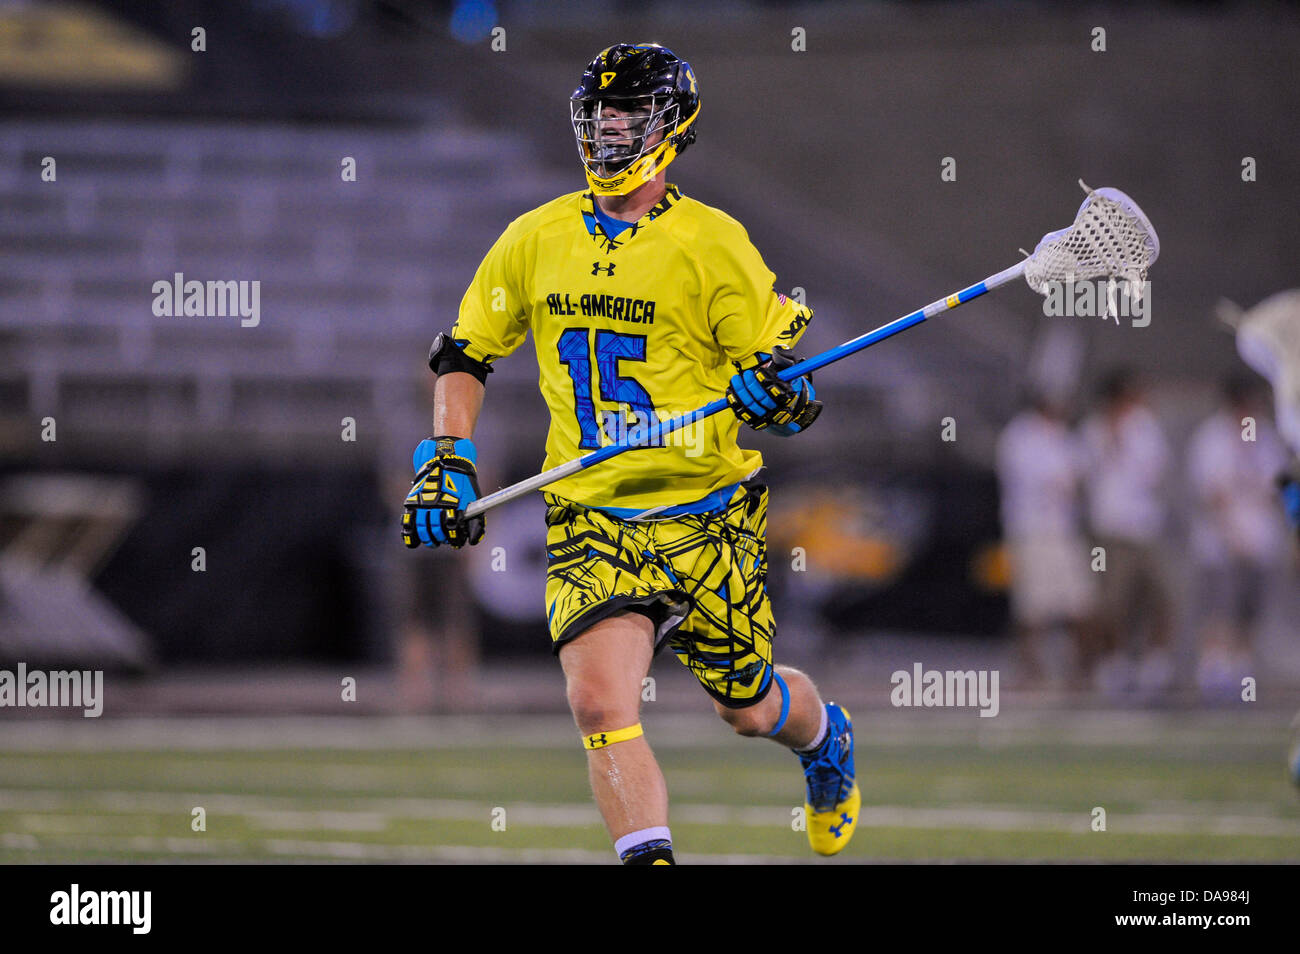 July 6, 2013 - Baltimore, MD, United States of America - July 6, 2013 Baltimore, MD.South All-Star Will Reynolds #15 drives to the goal during the 8th Annual Under Armour All-American Lacrosse Classic at Johnny Unitas Stadium Baltimore on July 6, 2013..South defeats North 28-24. Stock Photo